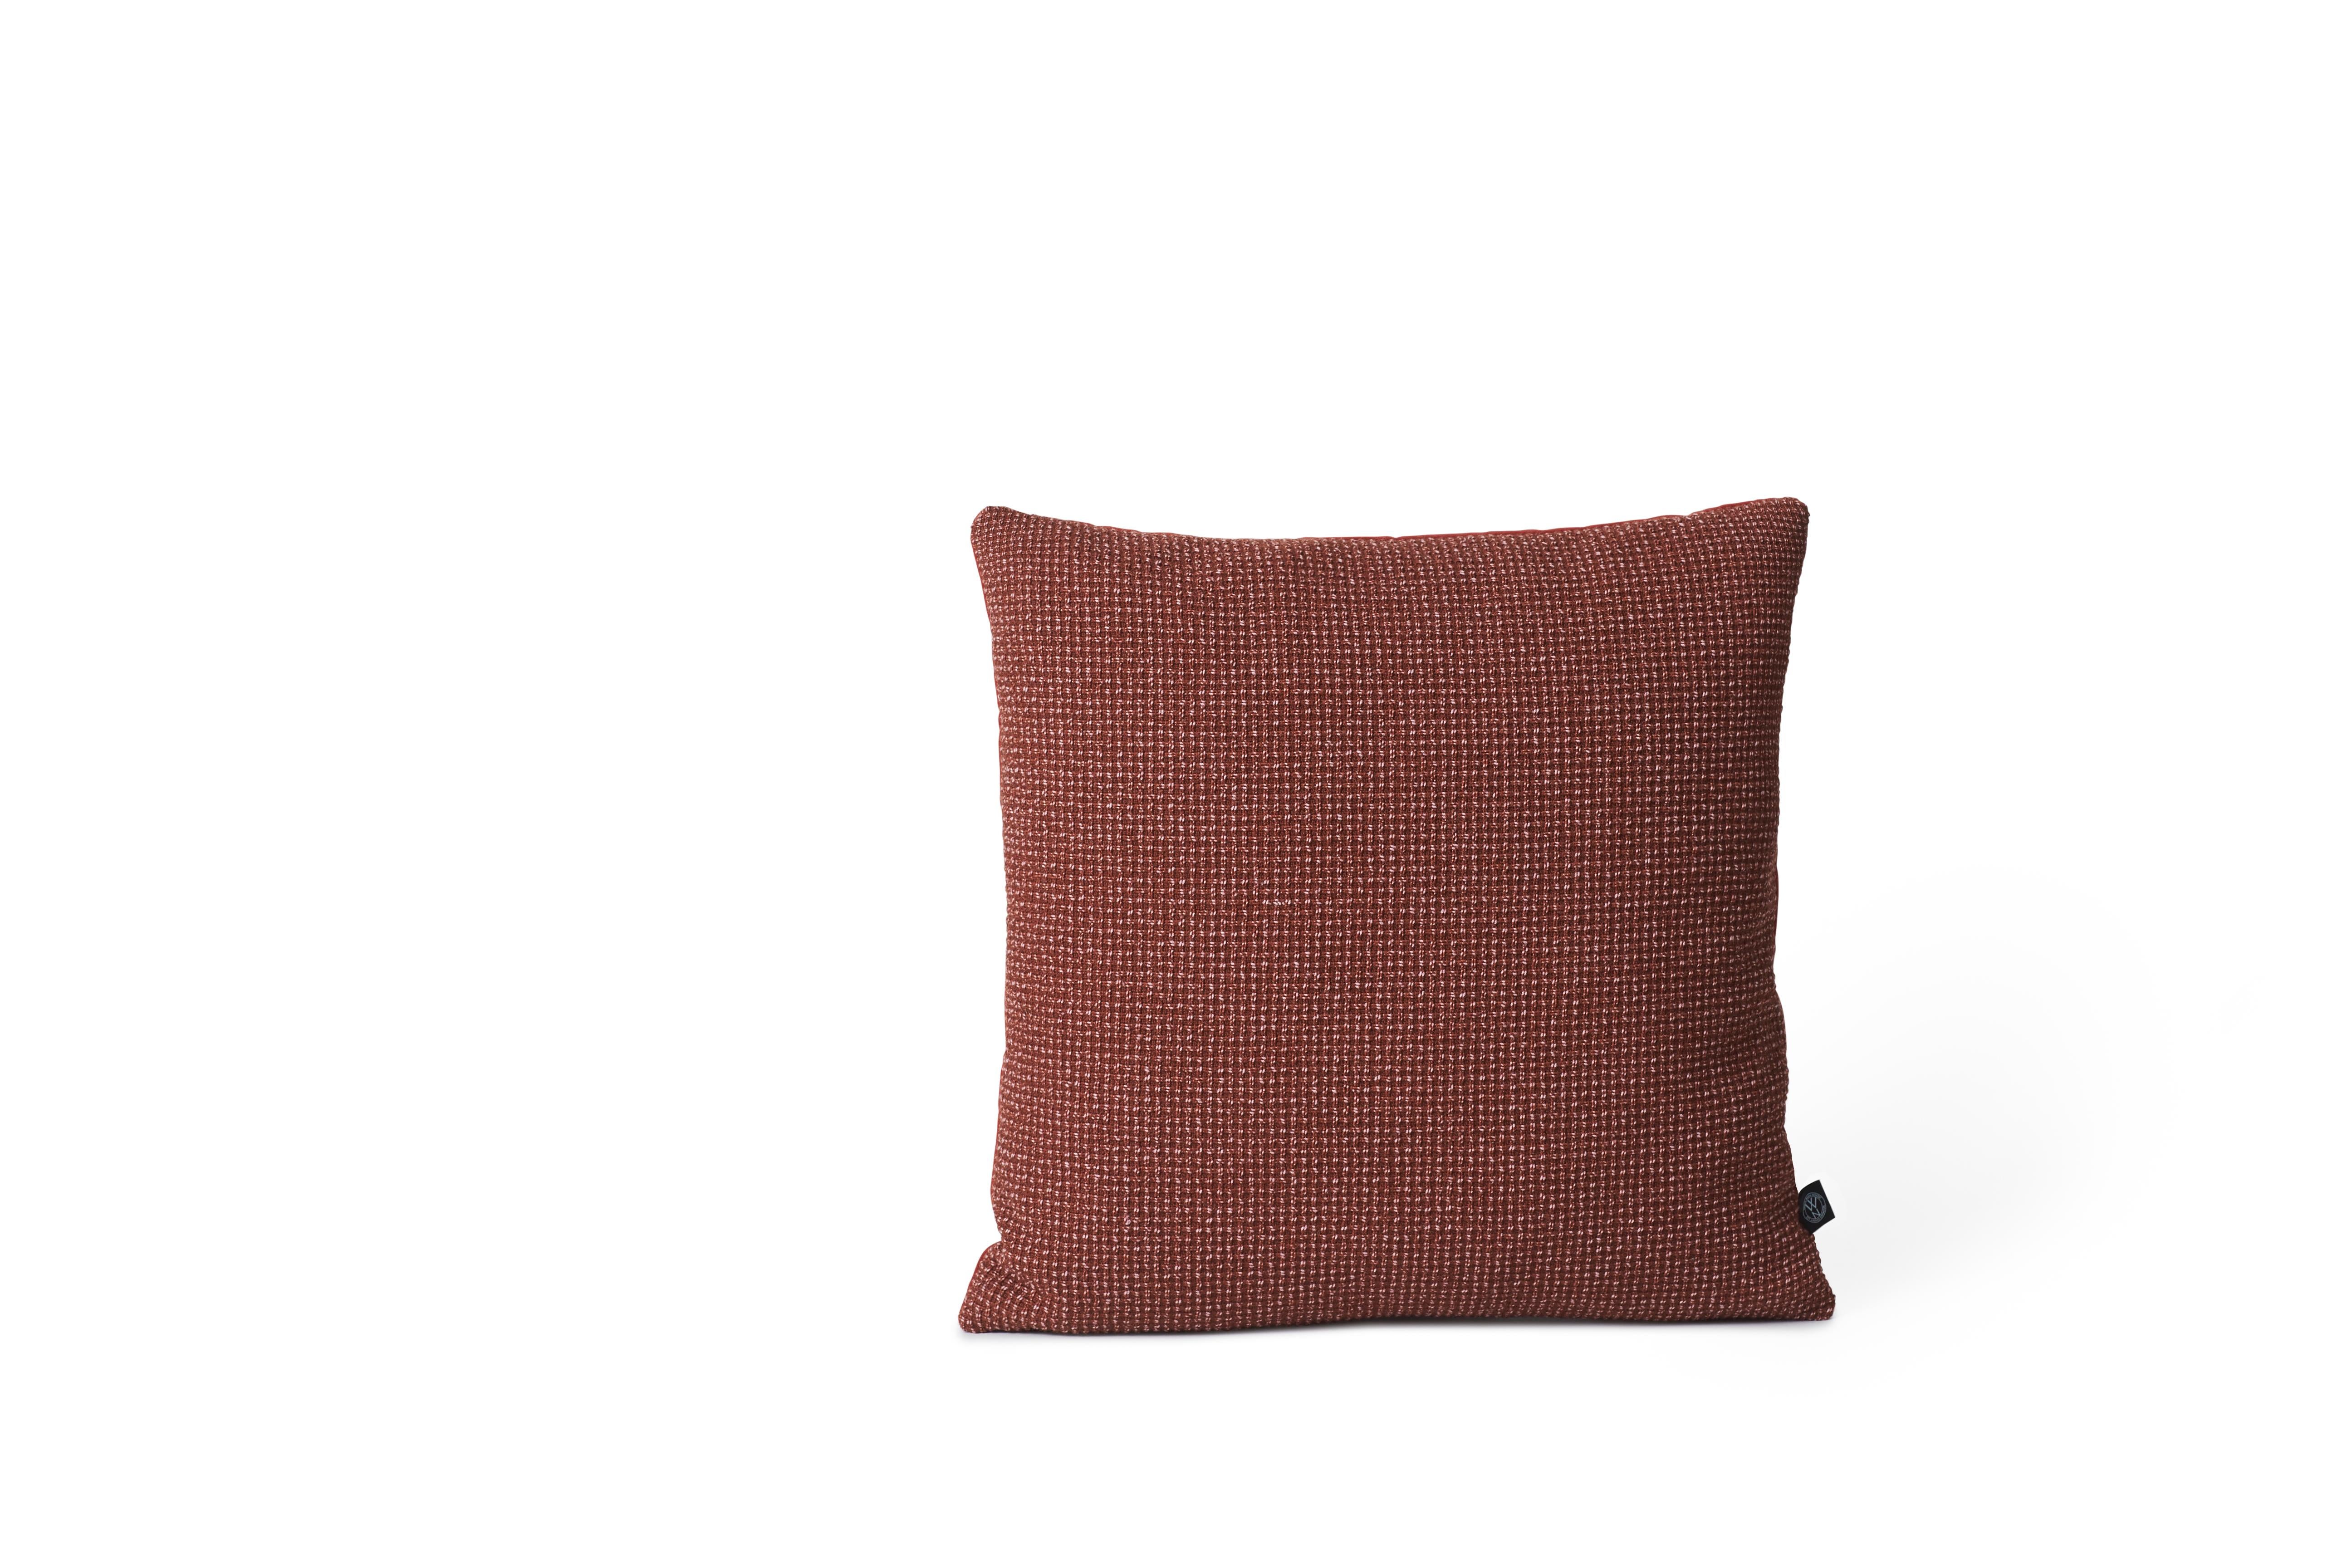 For Sale: Red Moodify Square Cushion, by Warm Nordic 3